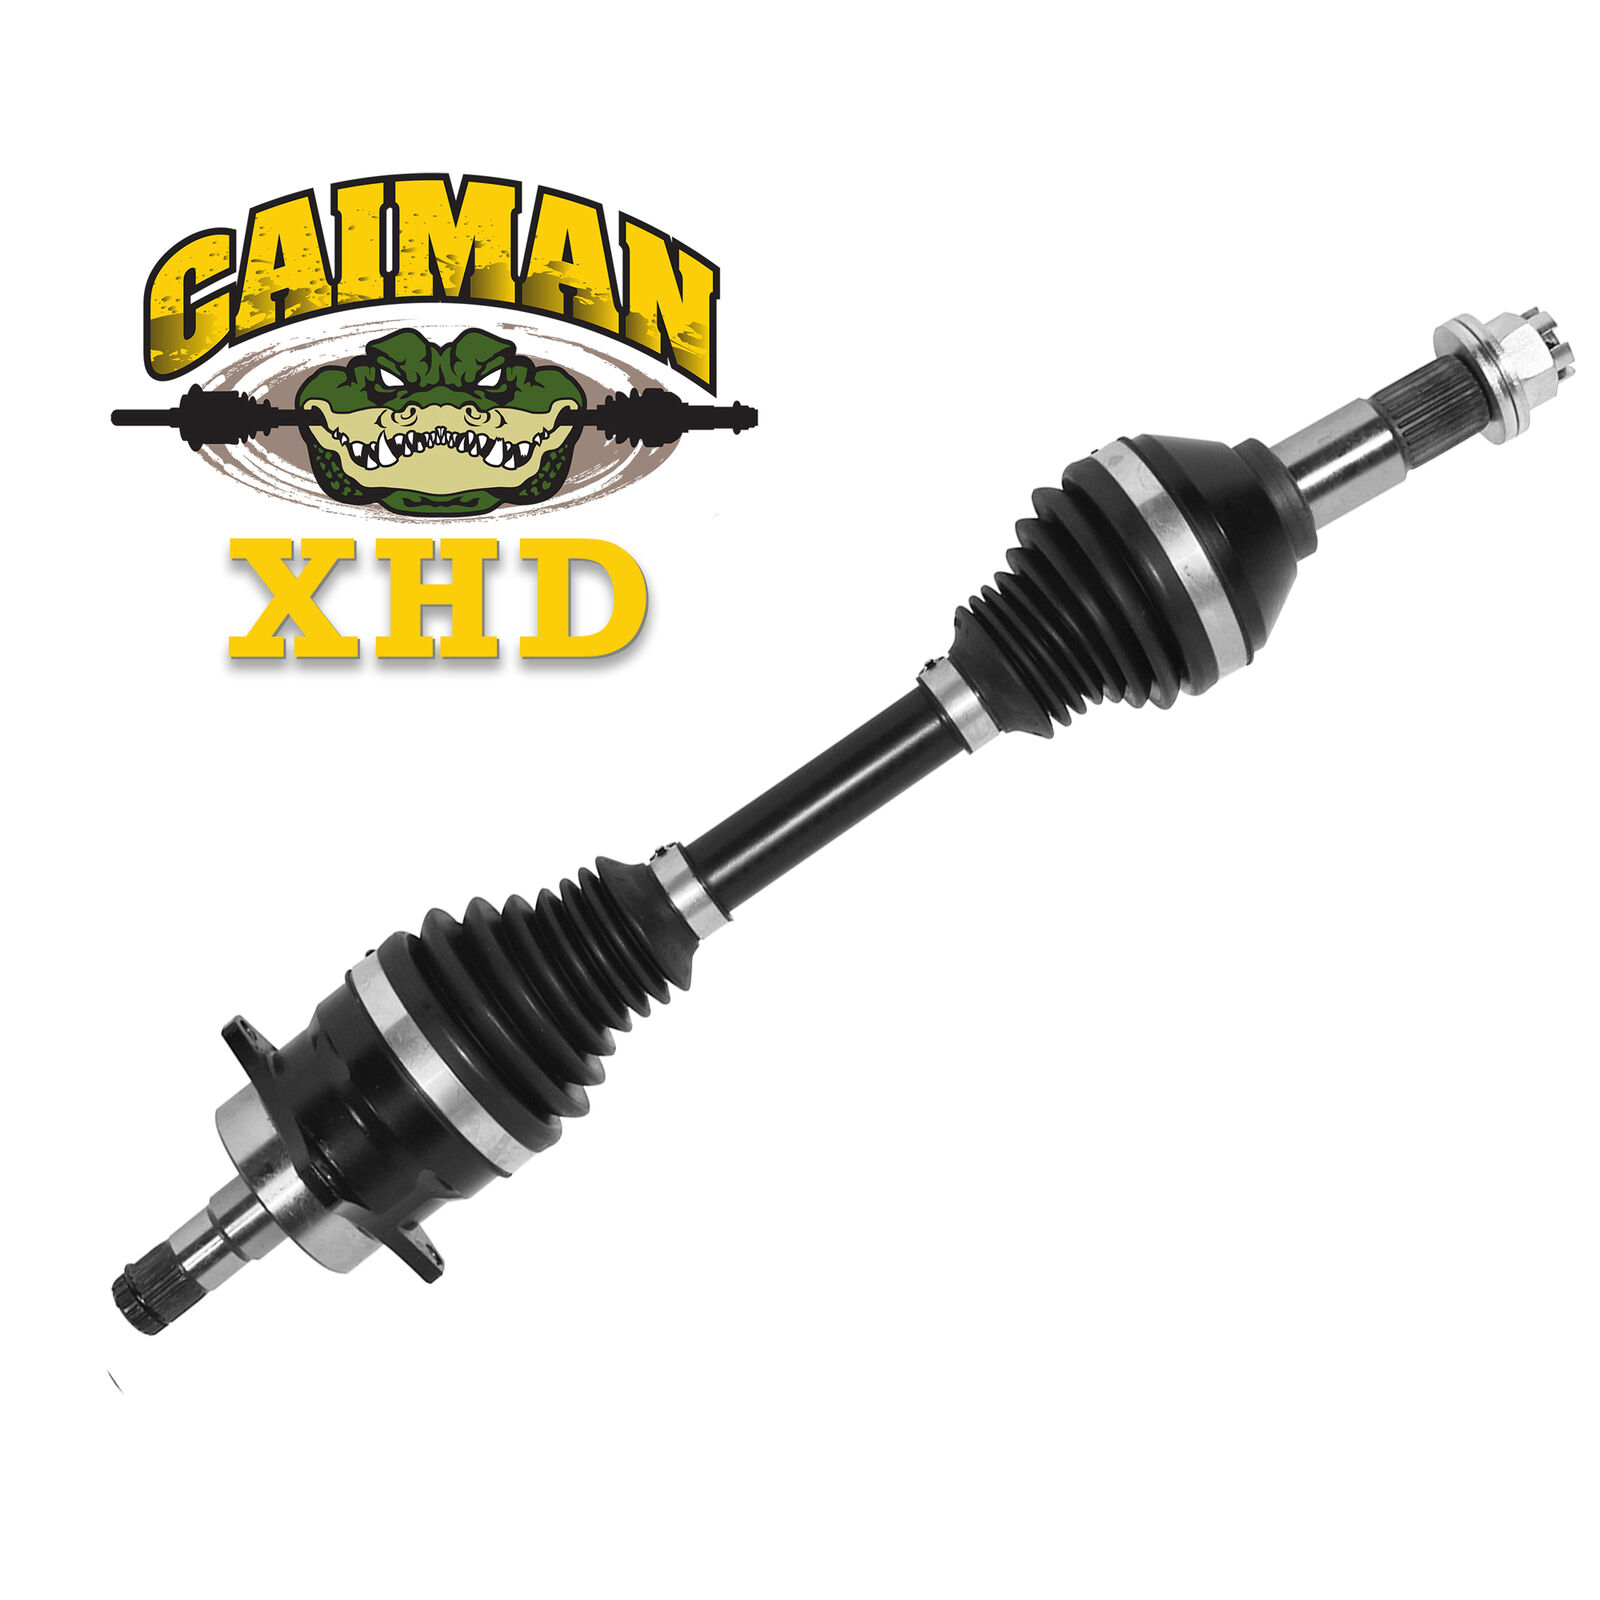 CAIMAN XHD SUPER DUTY Axle - Fits 2013-2018 Can Am RENEGADE 500/570 Front Left